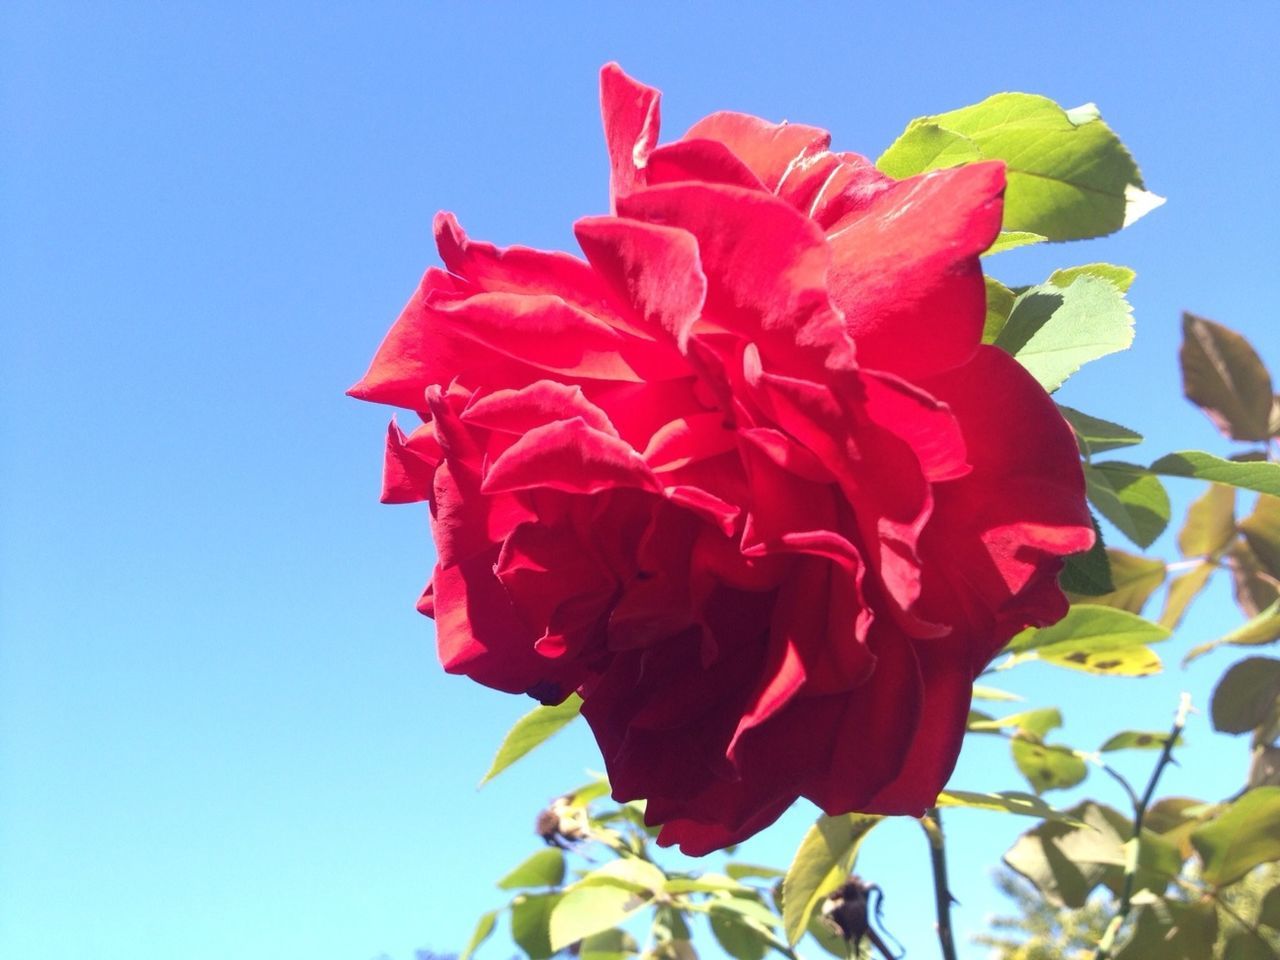 flower, freshness, petal, fragility, clear sky, flower head, growth, low angle view, red, beauty in nature, blooming, nature, close-up, in bloom, blue, plant, blossom, day, leaf, sunlight